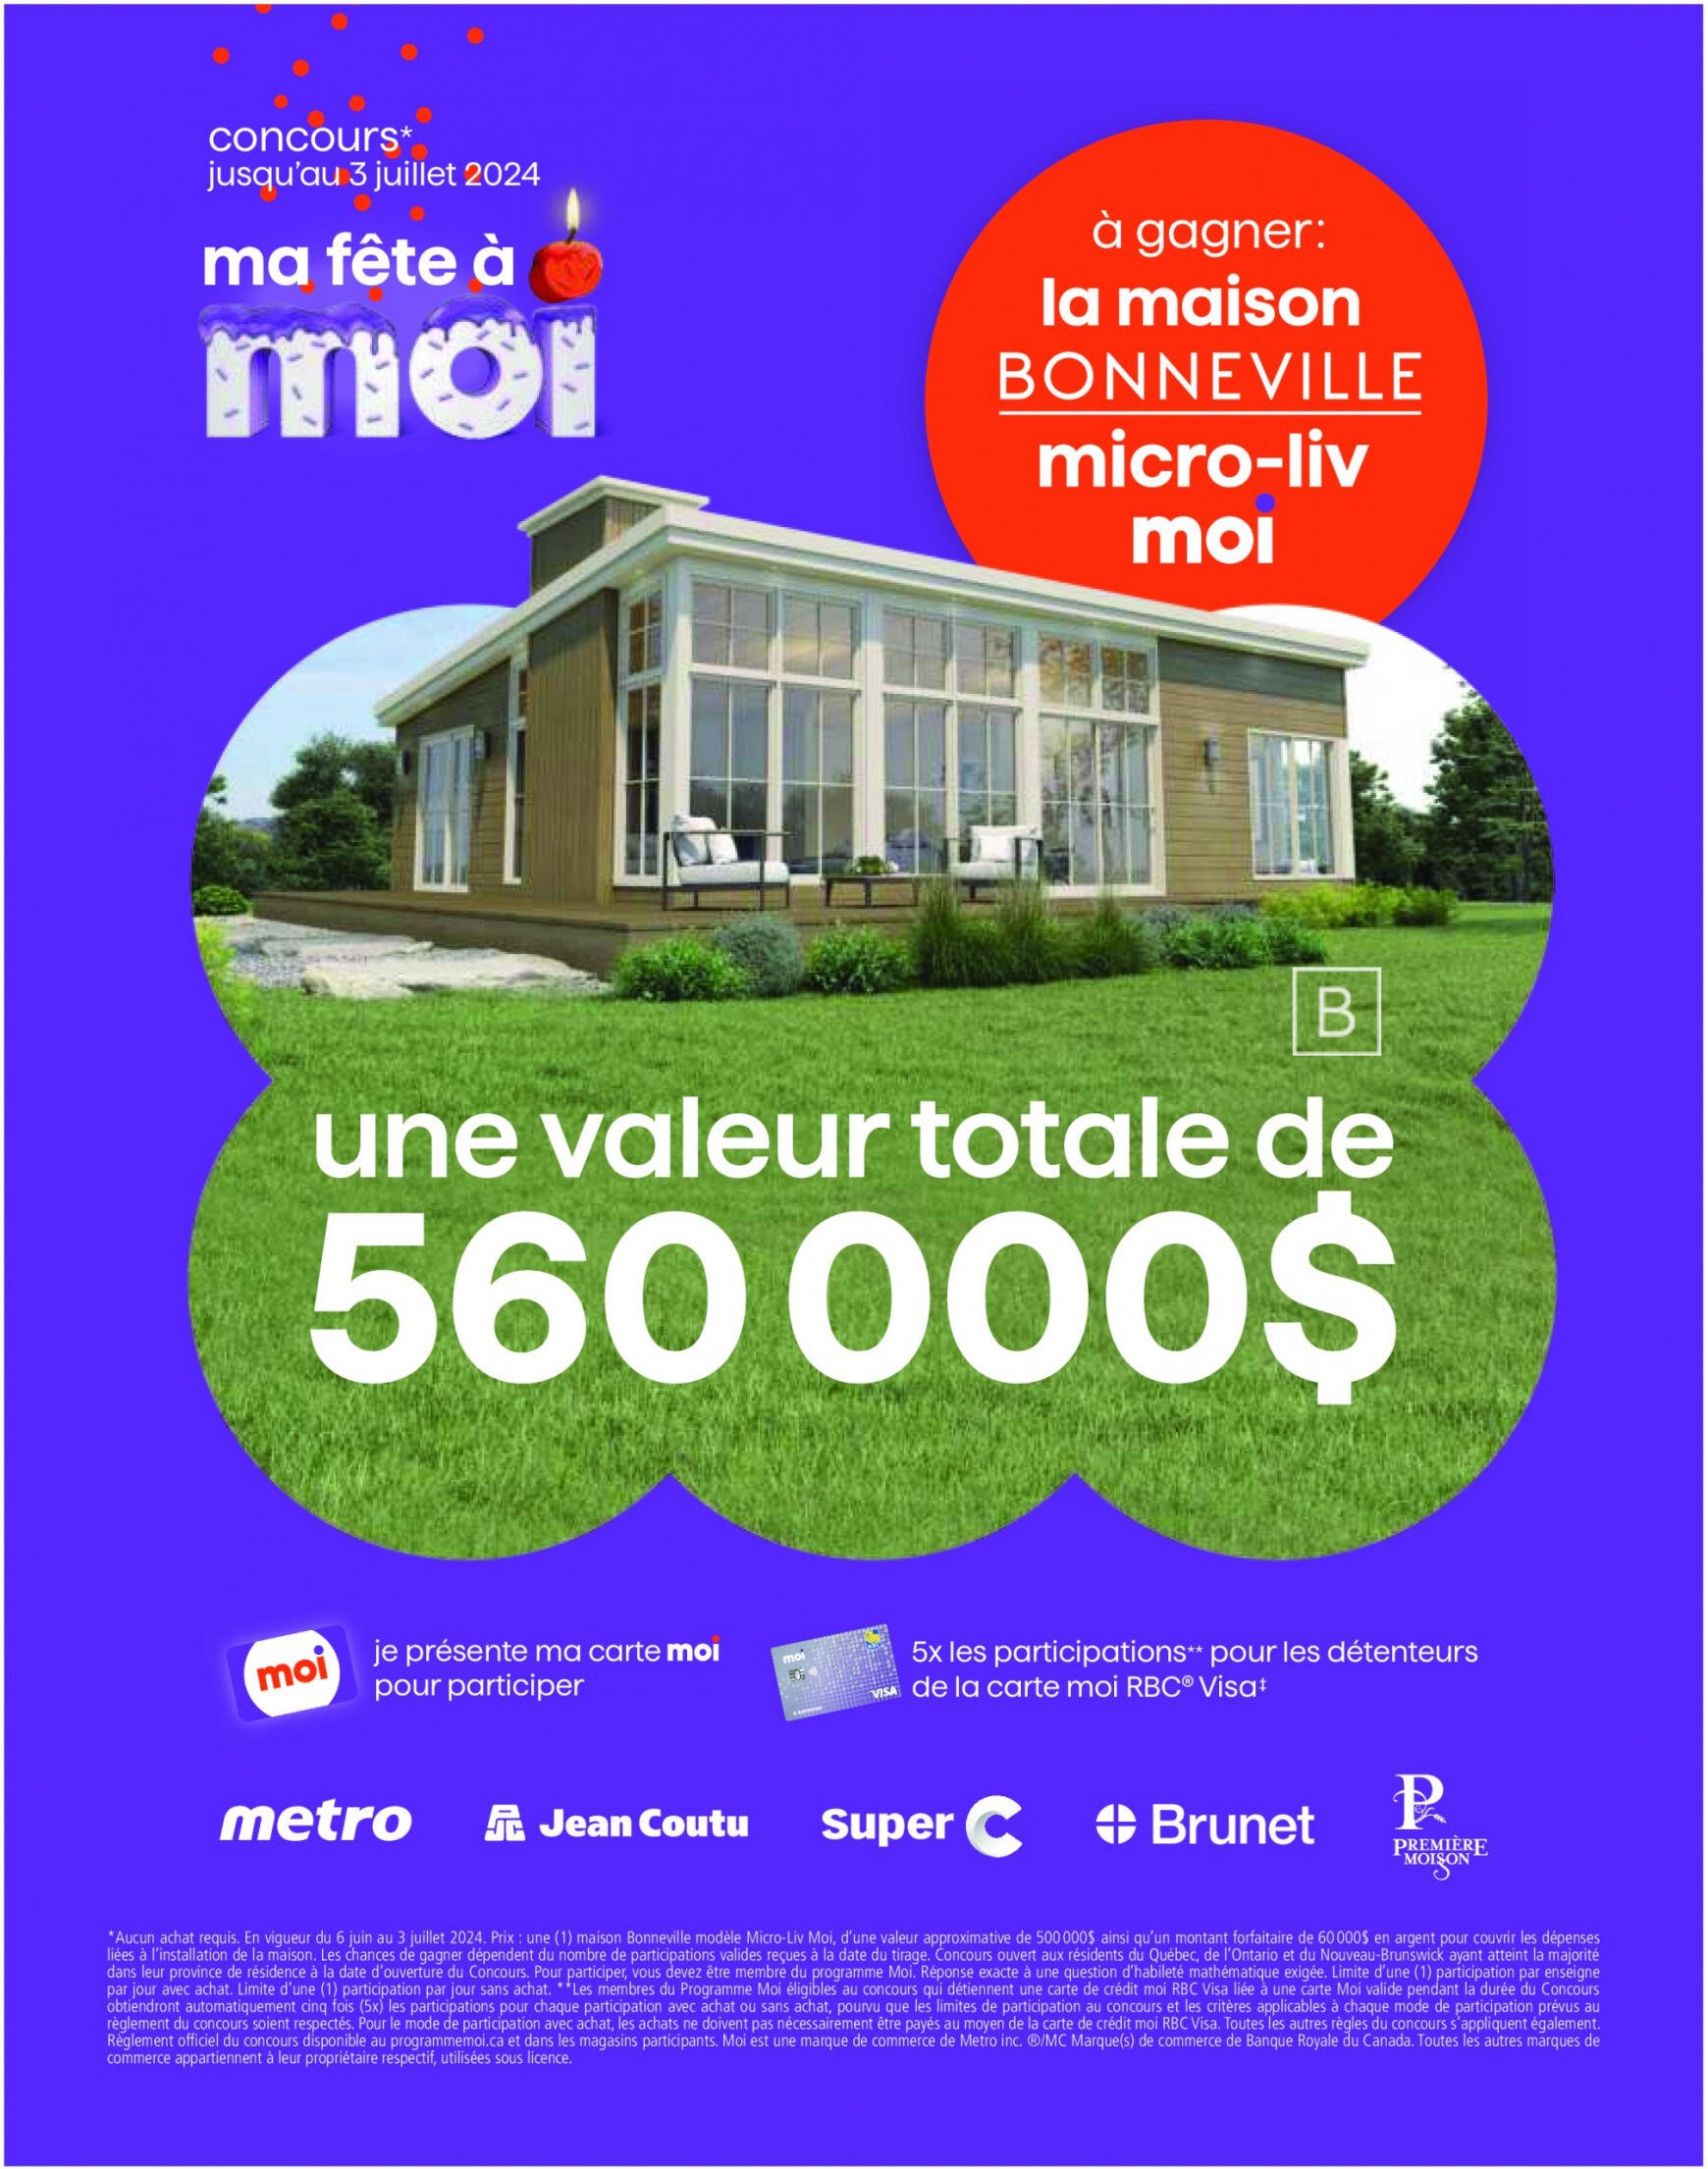 metro - Metro - Moi flyer current 05.06. - 31.01. - page: 19